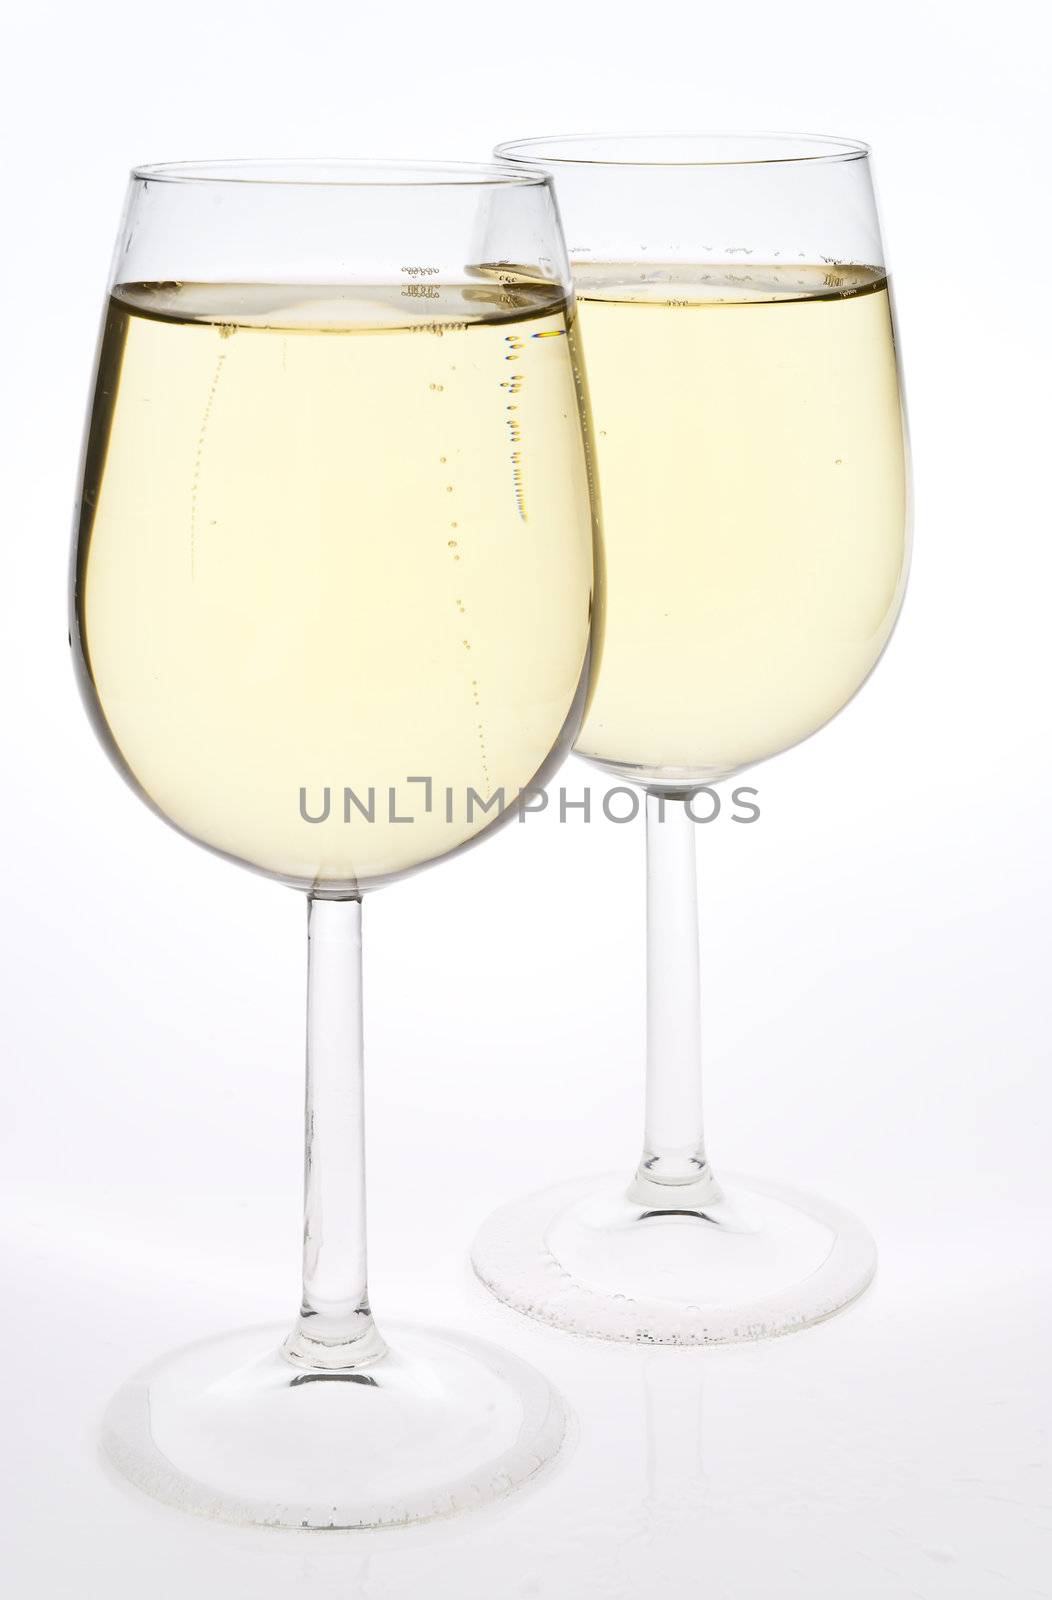 Merry Christmas and happy New year. Pair of champagne flutes making a toast, isolated on white background.